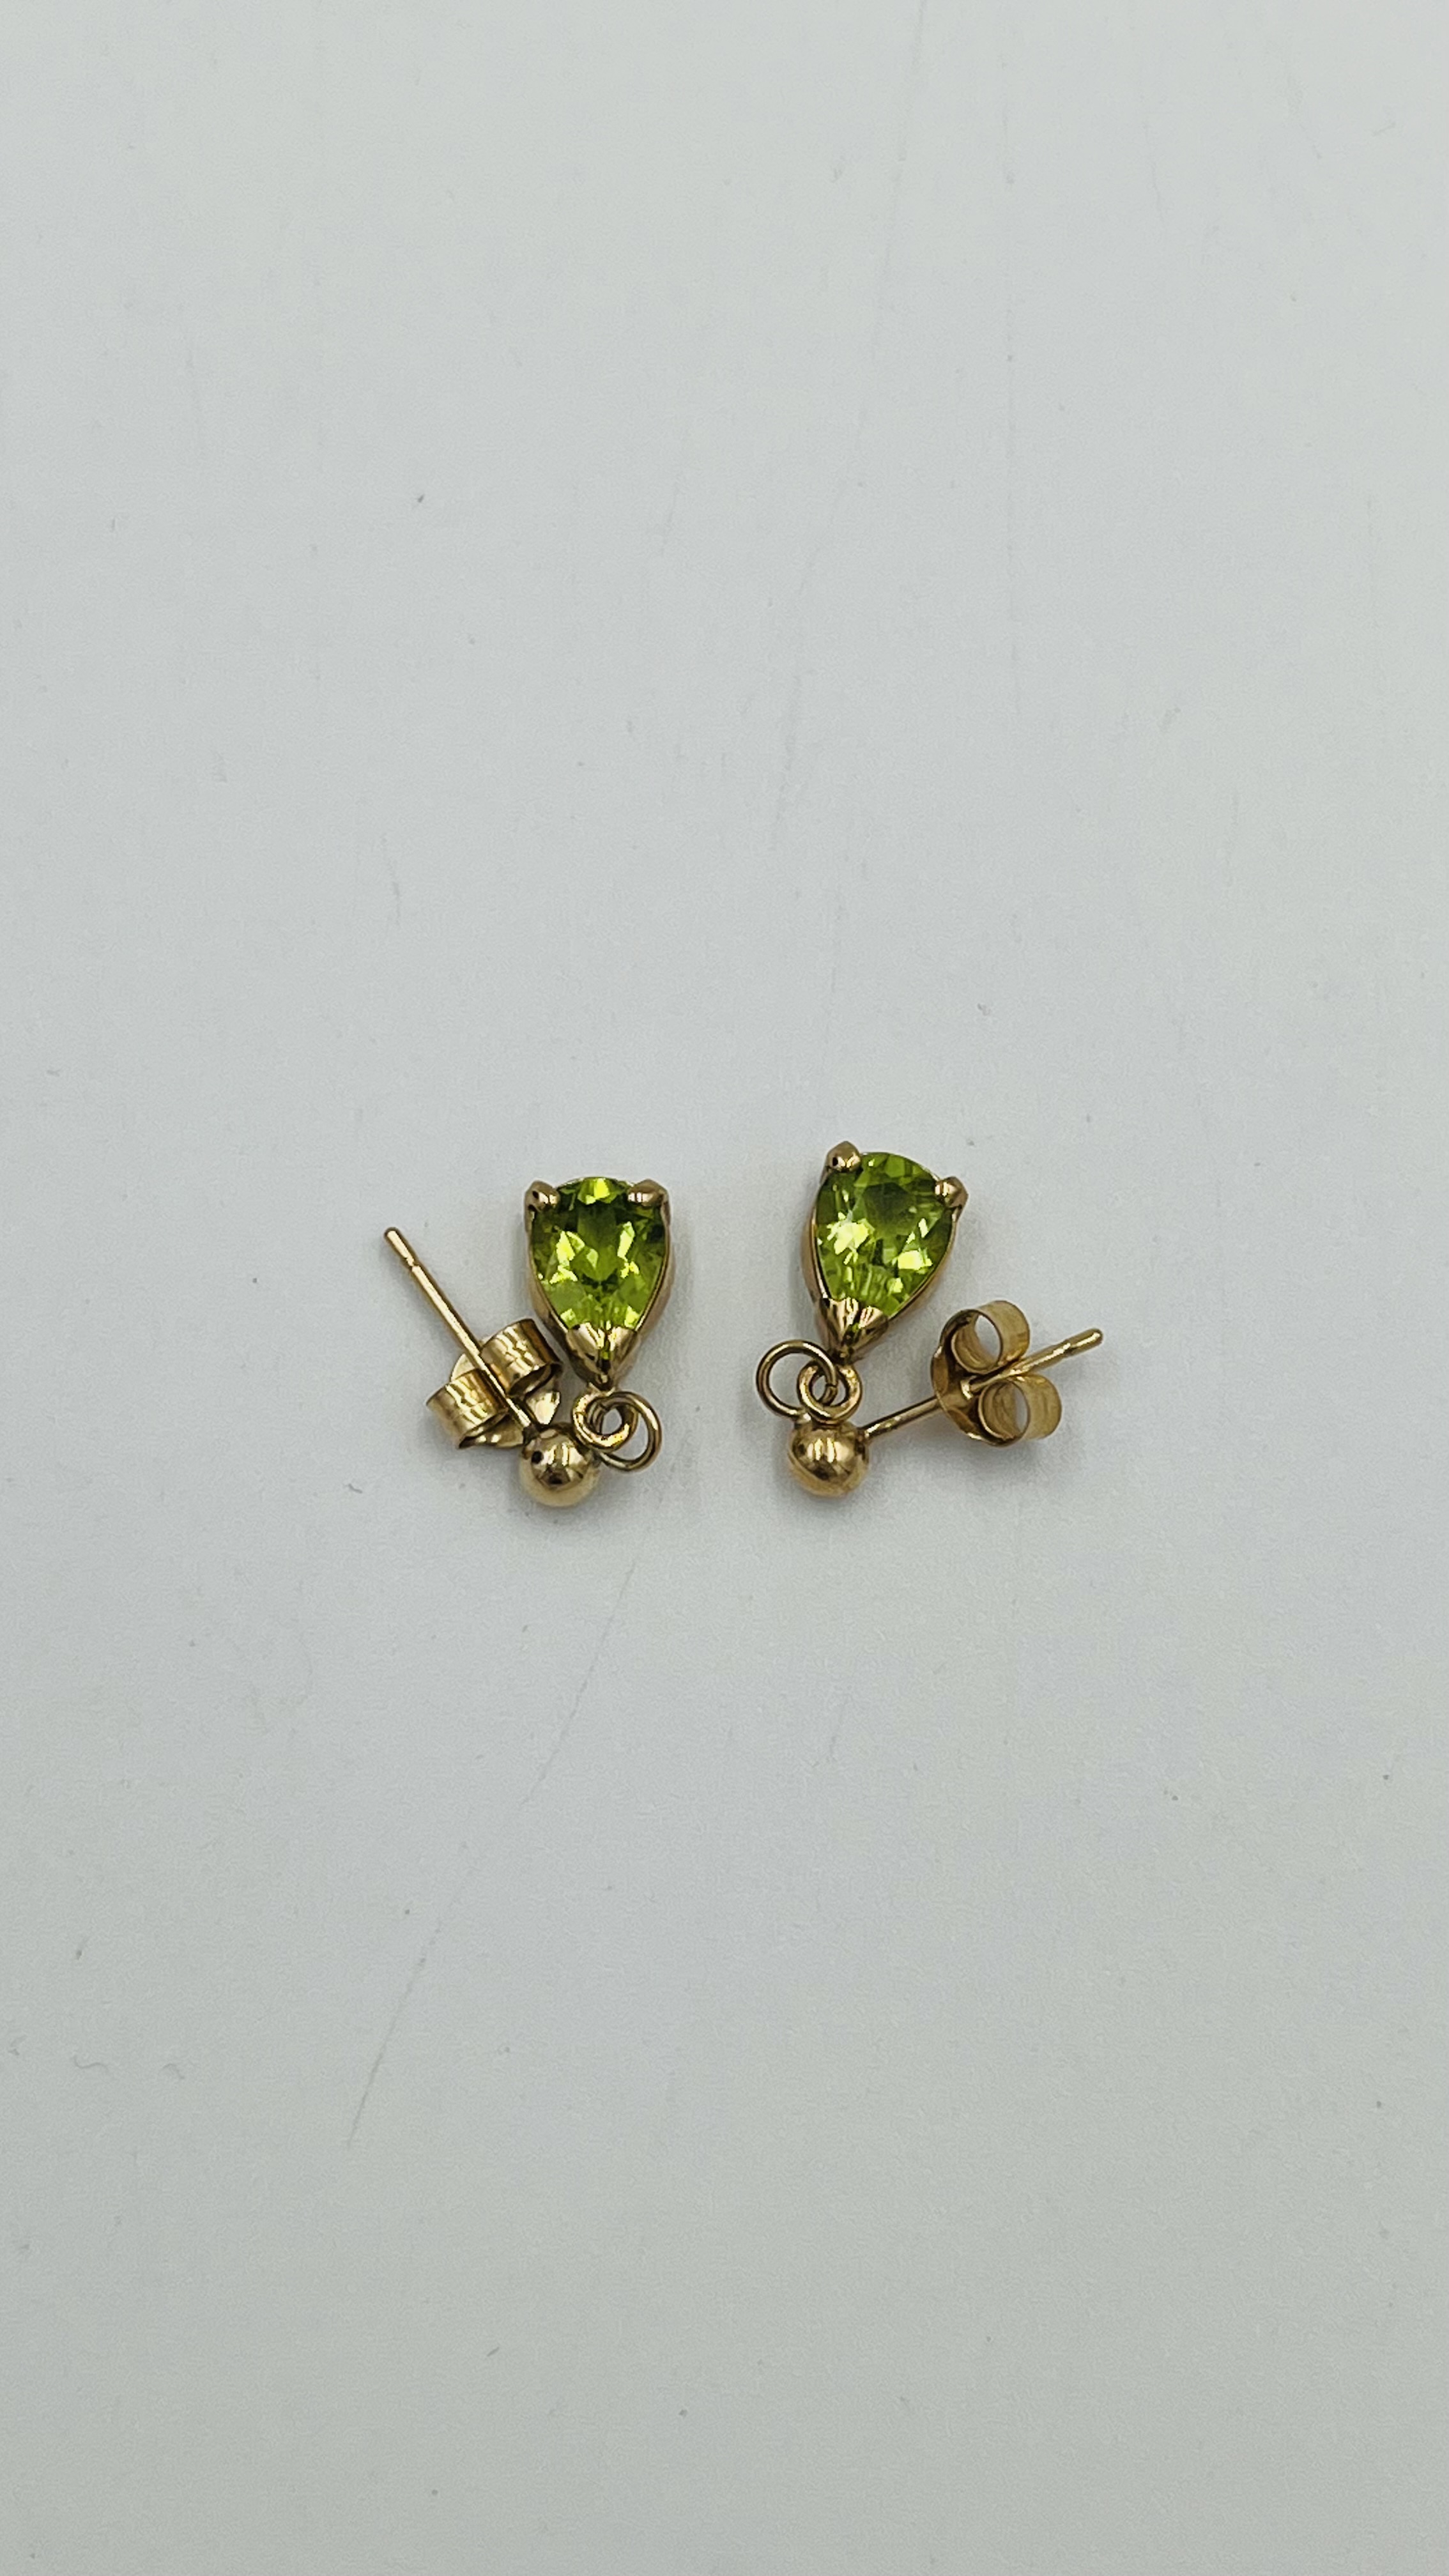 Pair of 9ct gold earrings - Image 3 of 3